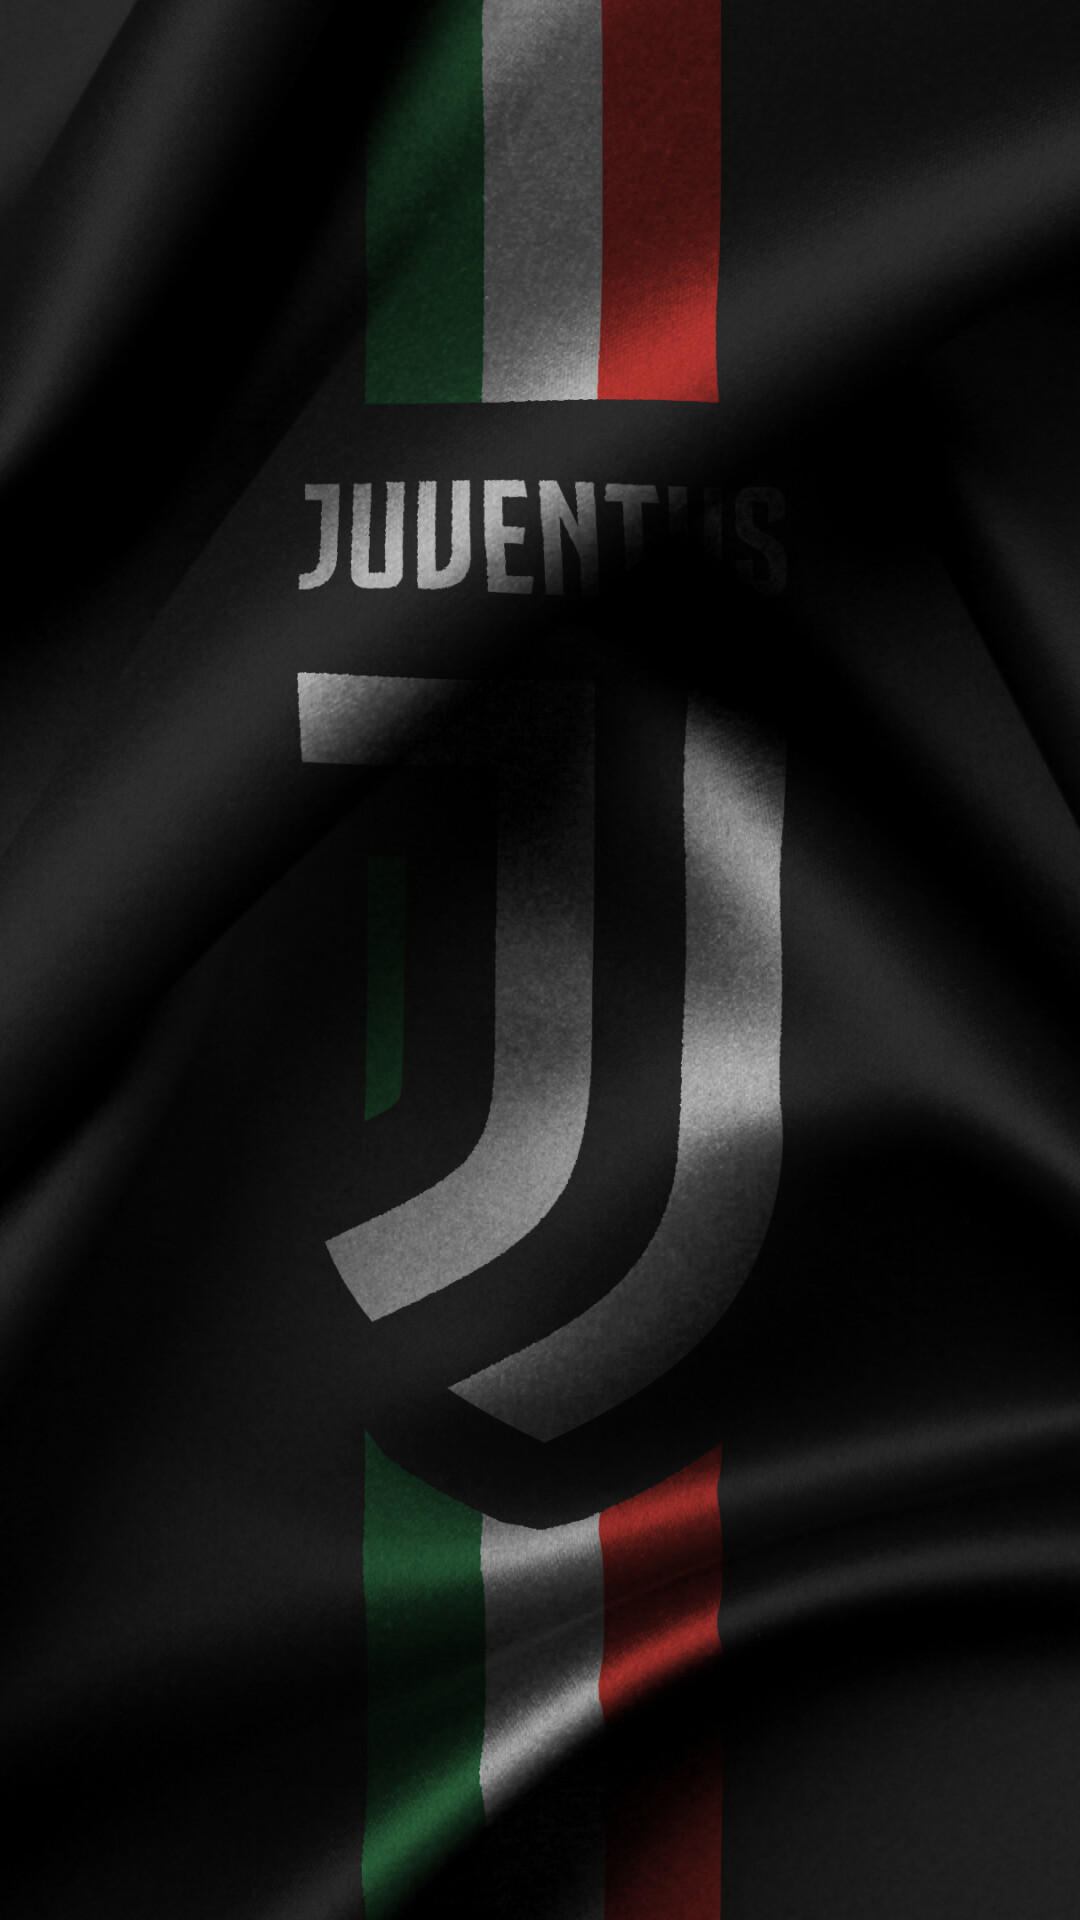 Forza Juve, Juventus passion, Football excellence, Unwavering support, 1080x1920 Full HD Handy